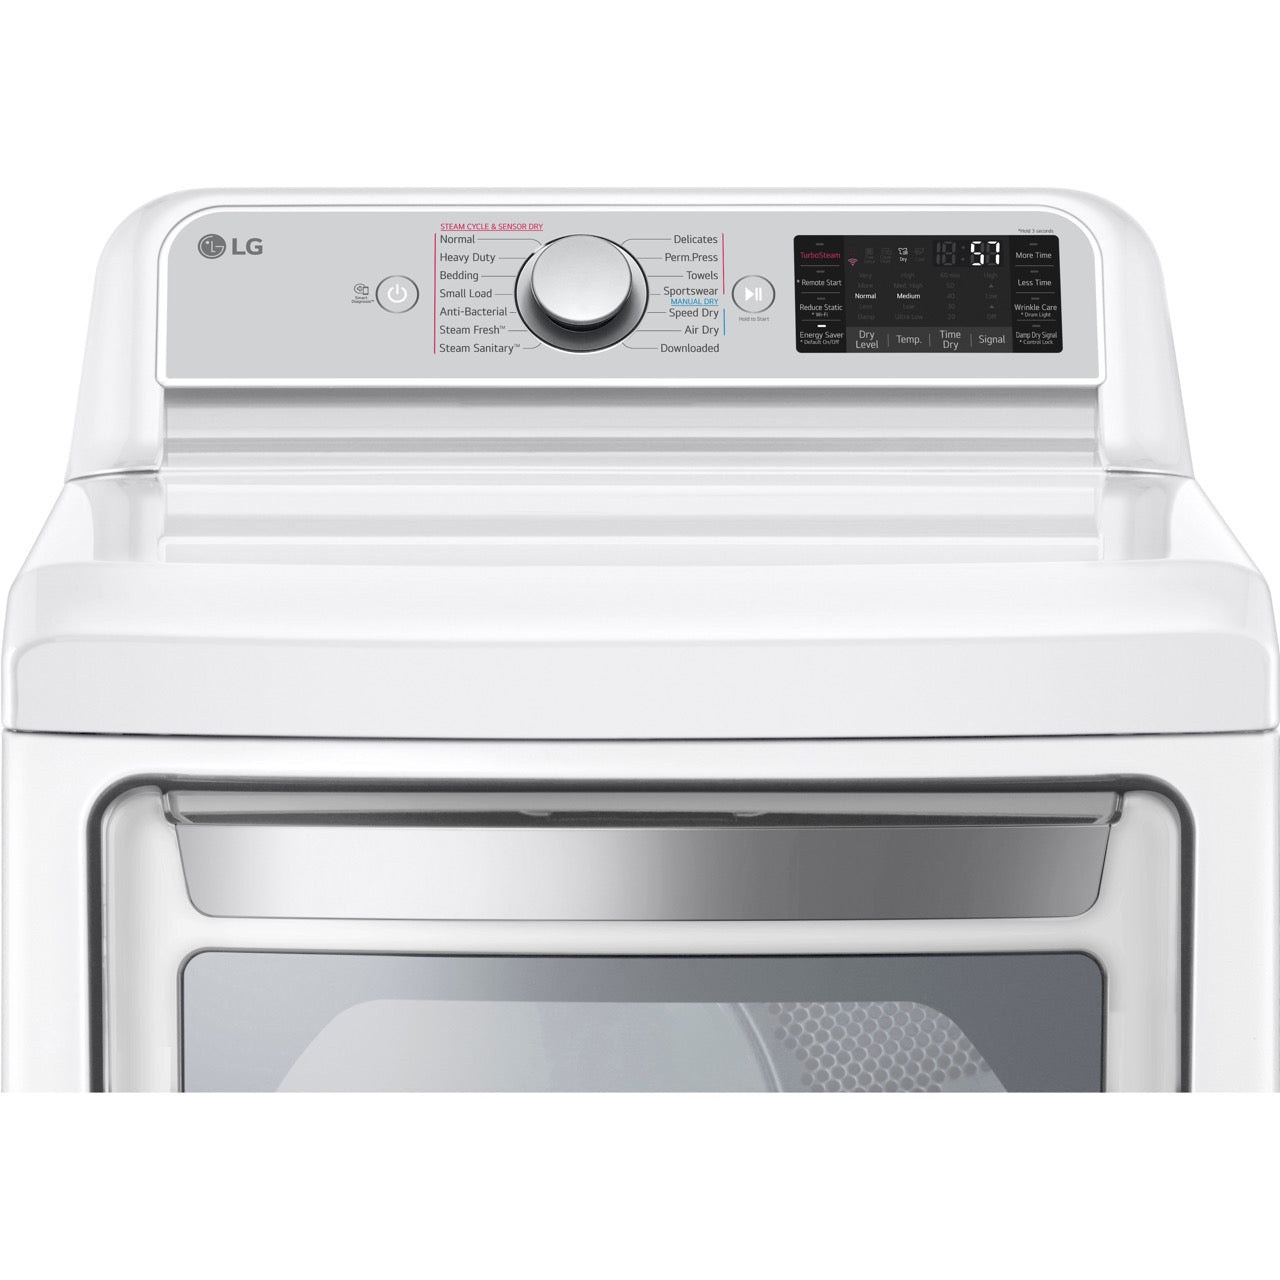 LG Smart Wi-Fi Enabled Electric Dryer- 27 Inch in White (DLEX7900WE)